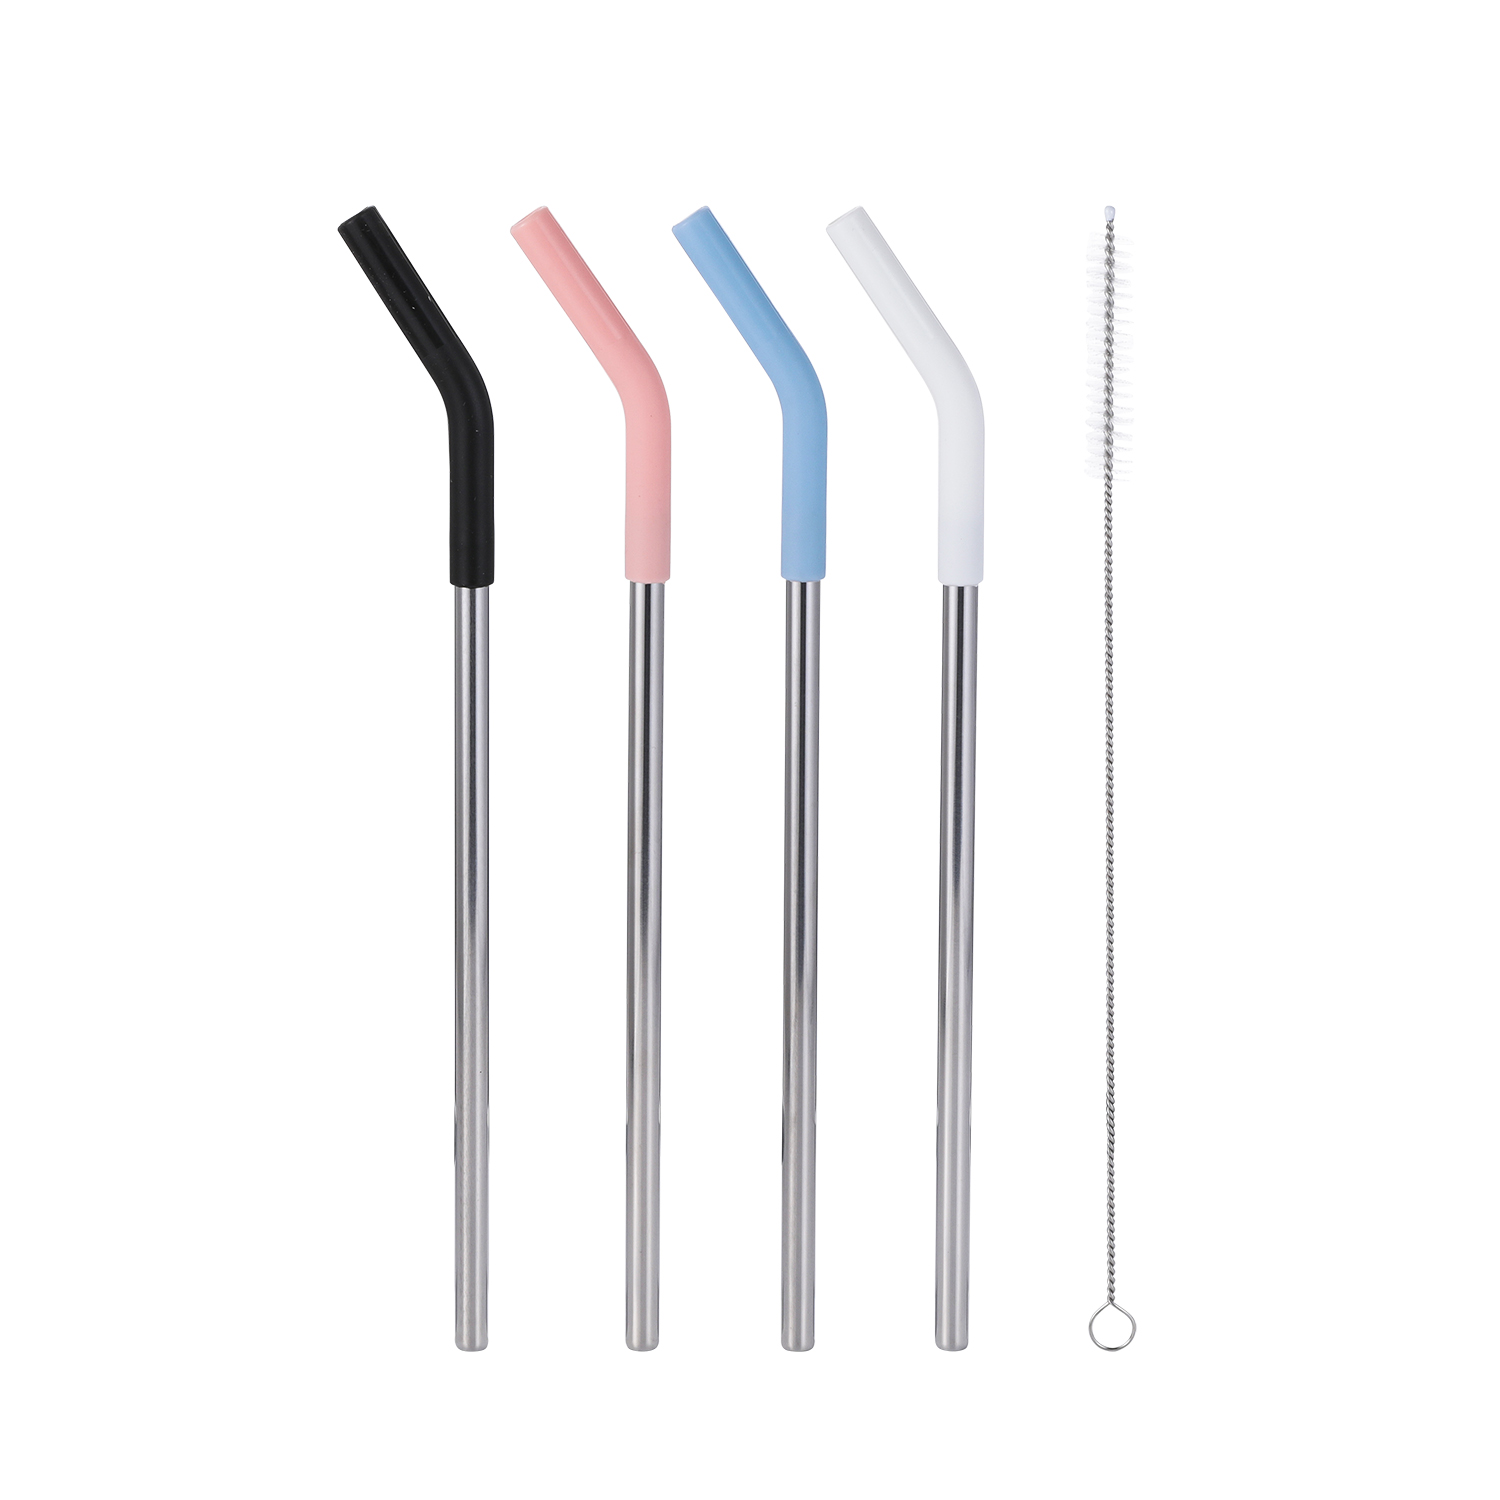 Mainstays Stainless Steel Straw Set，White，Black，Pink, Blue - image 1 of 7